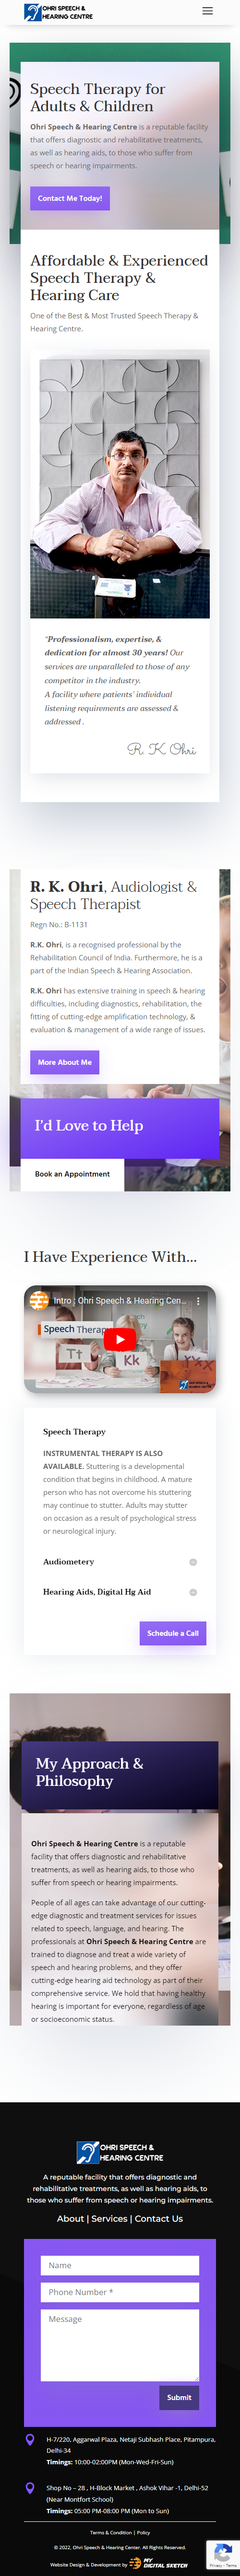 OHRI speach and hearing center mobile view